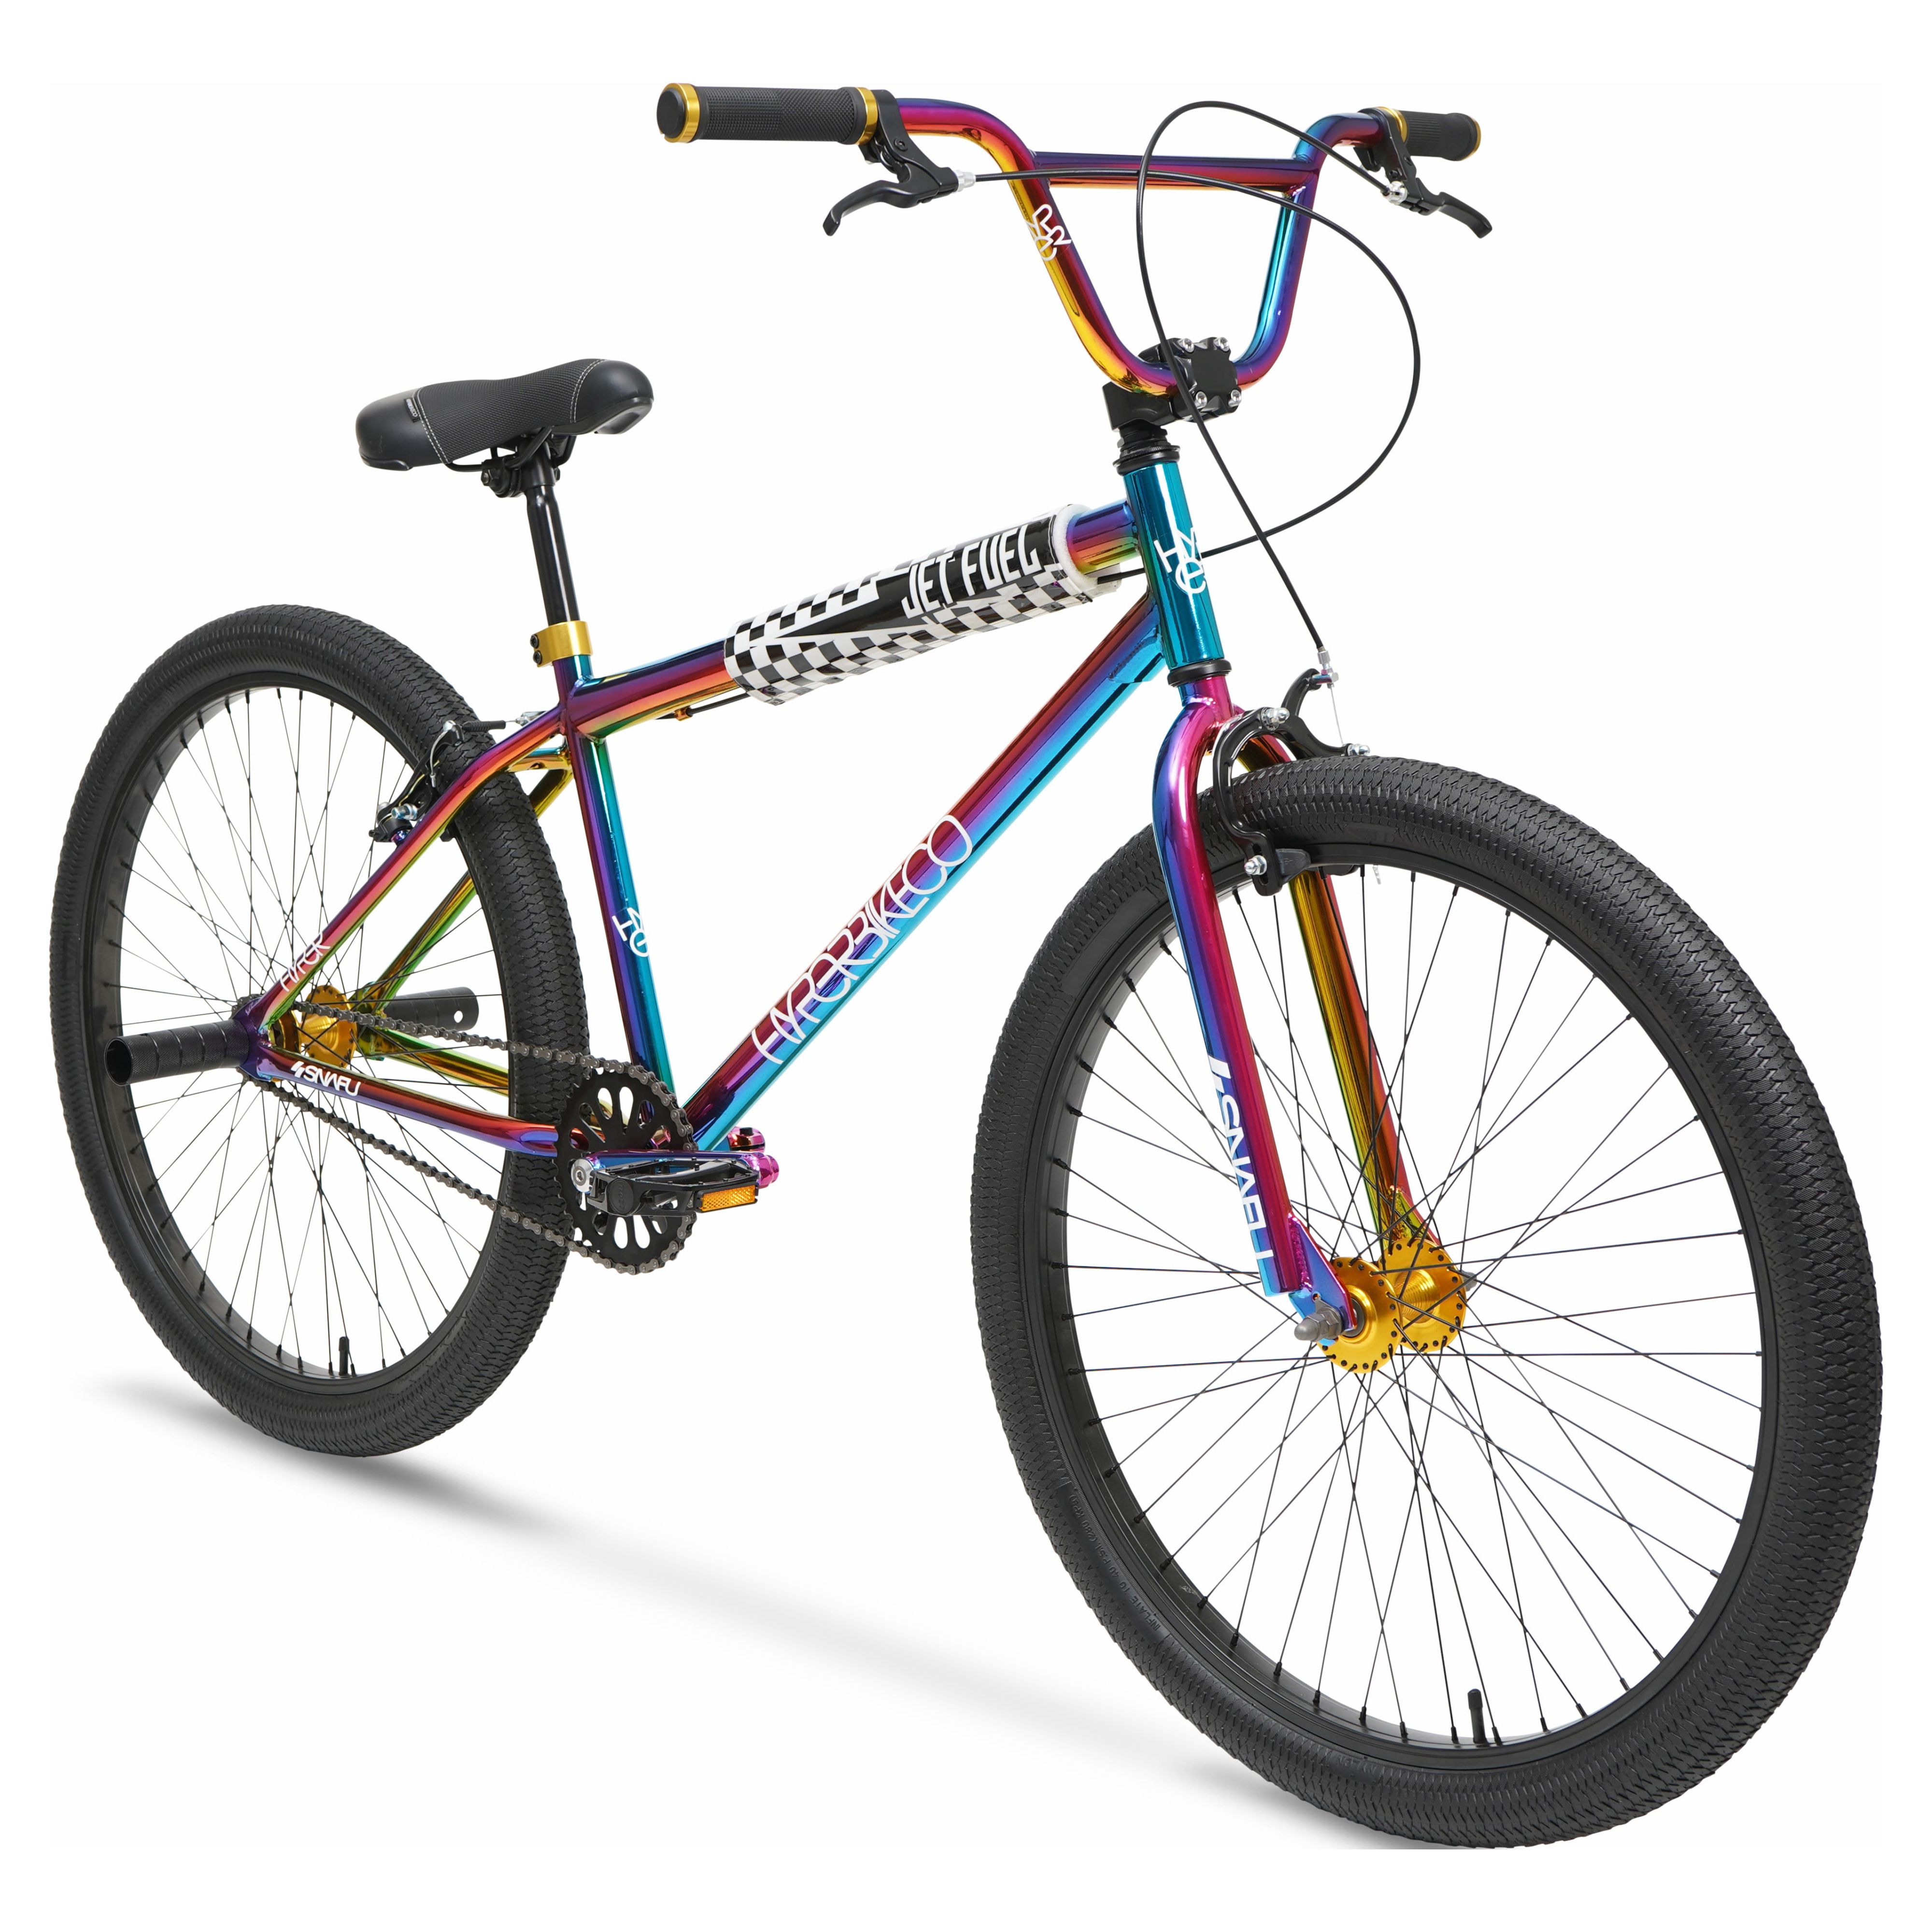 Hyper Bicycles 26" Jet Fuel BMX Bike for Adults - image 1 of 8